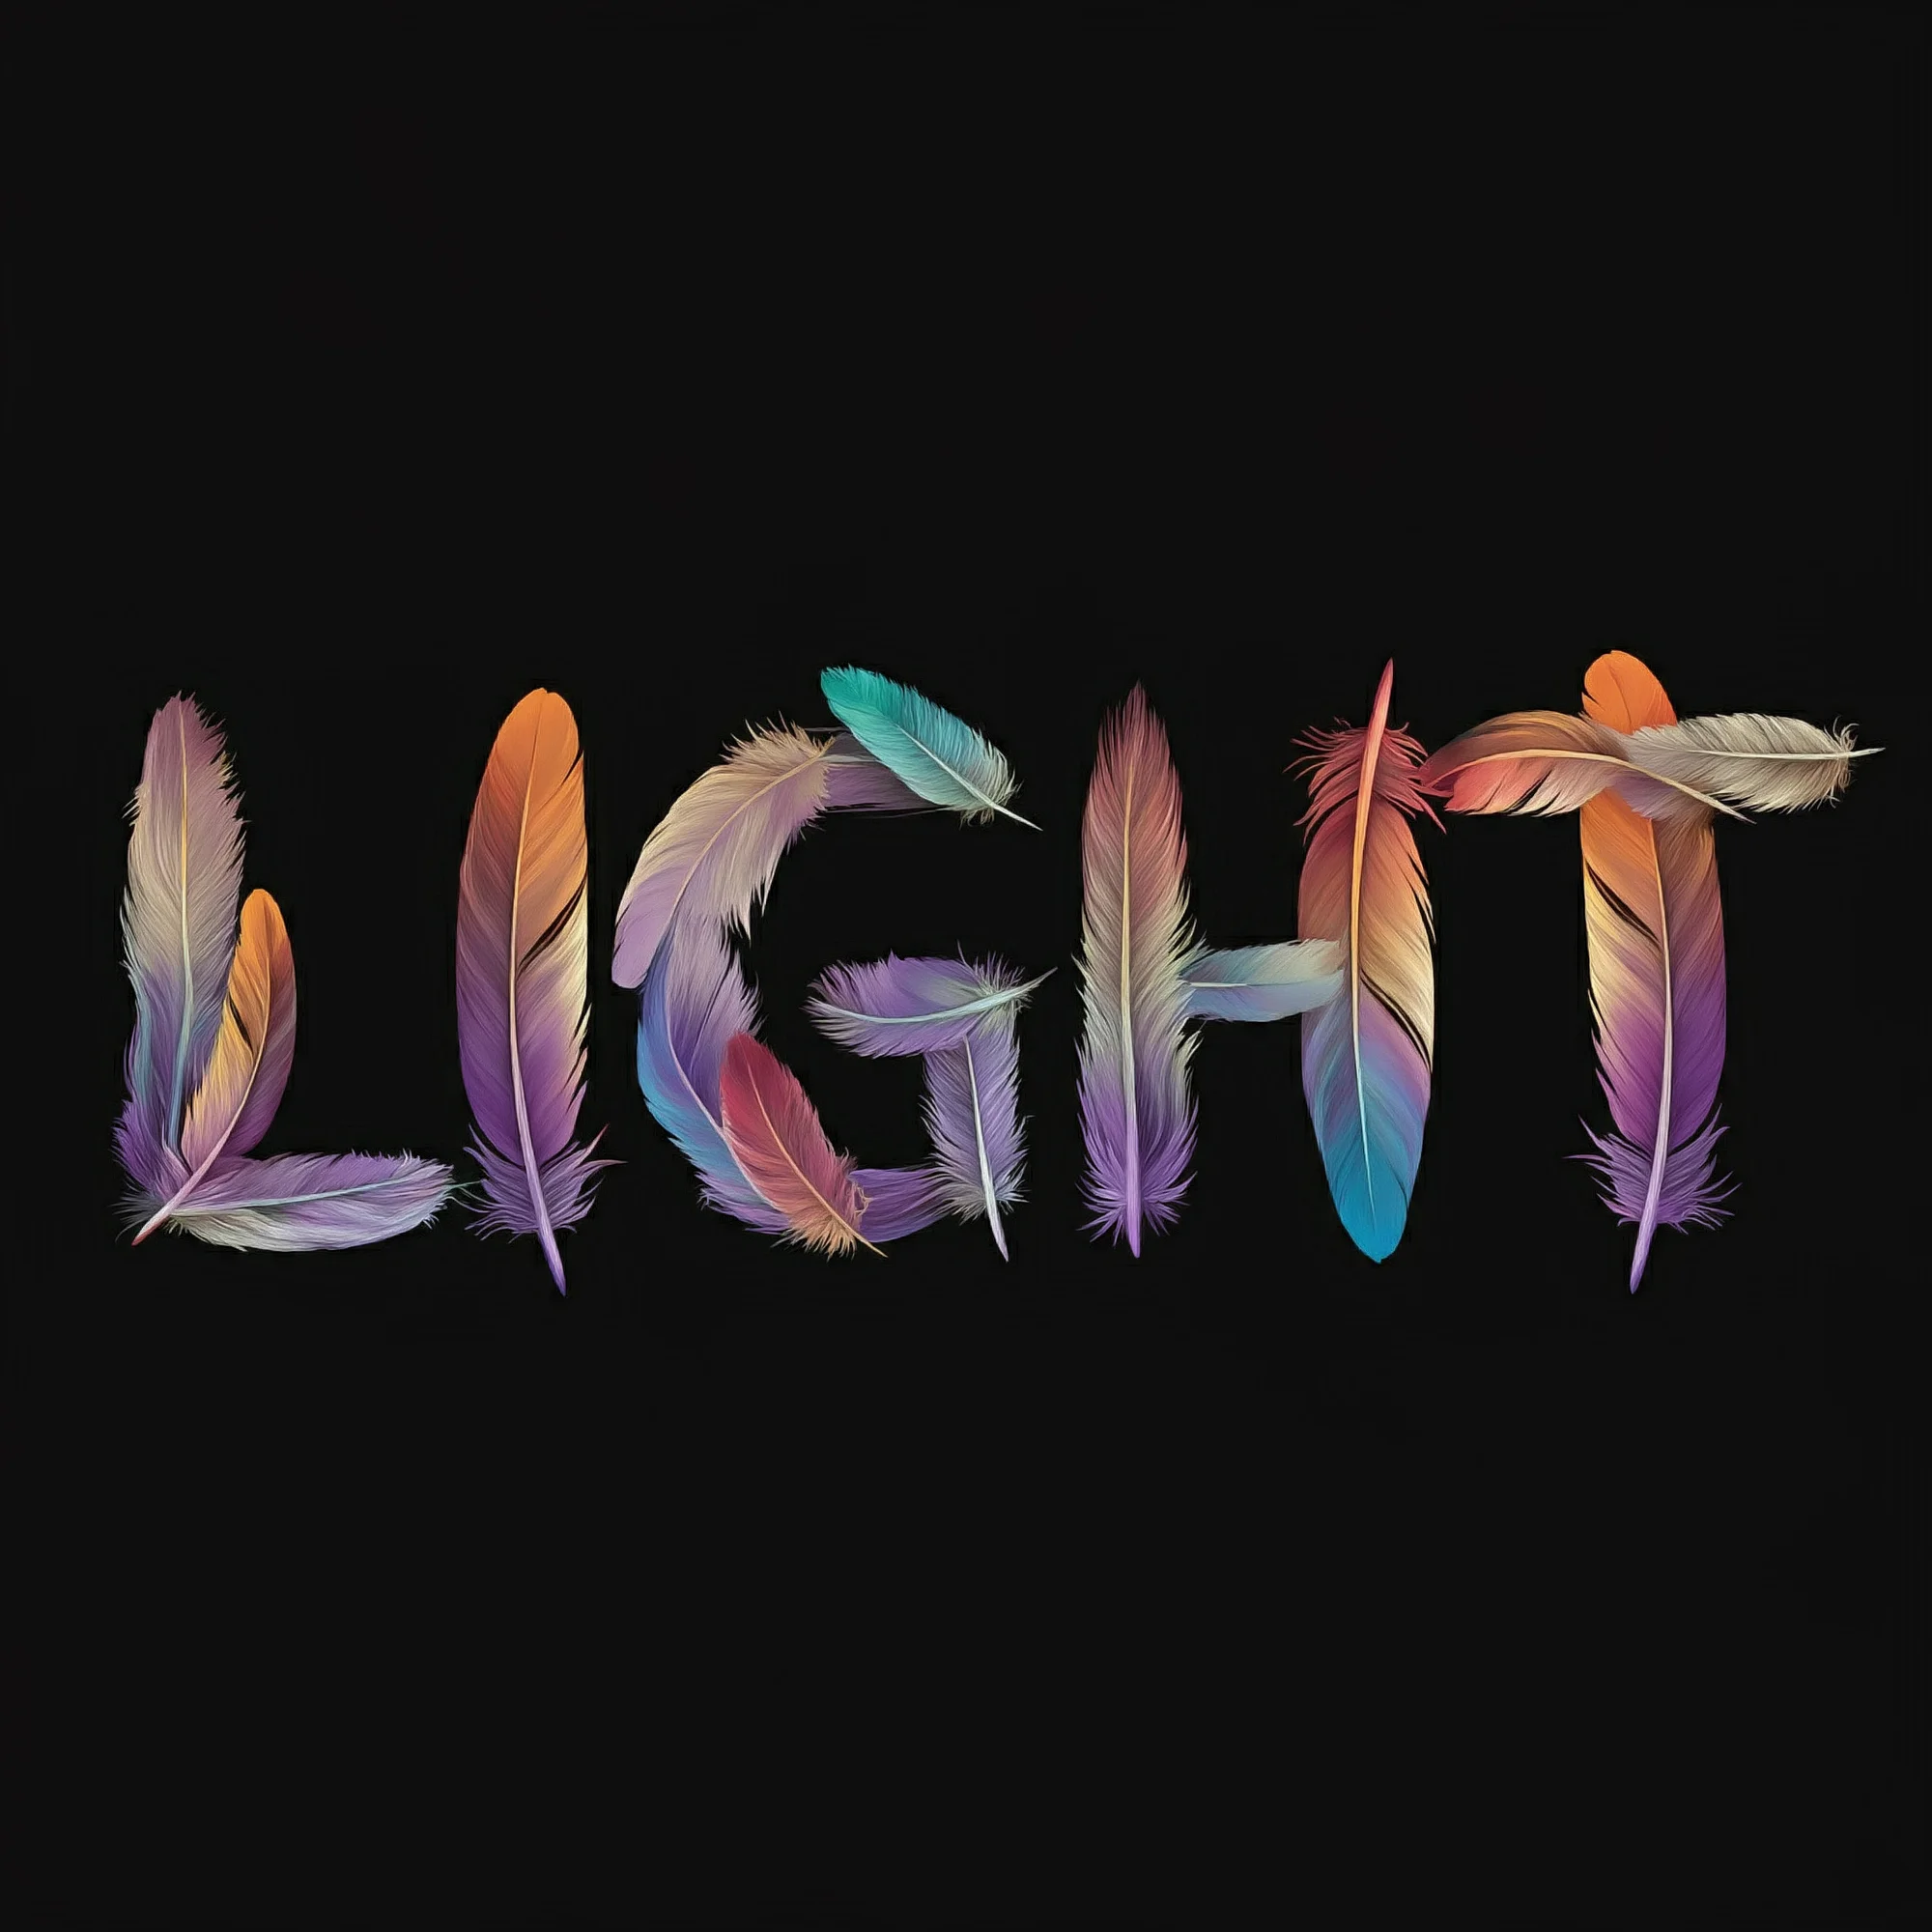 Prompt: Word “light” made from various colorful feathers, black background